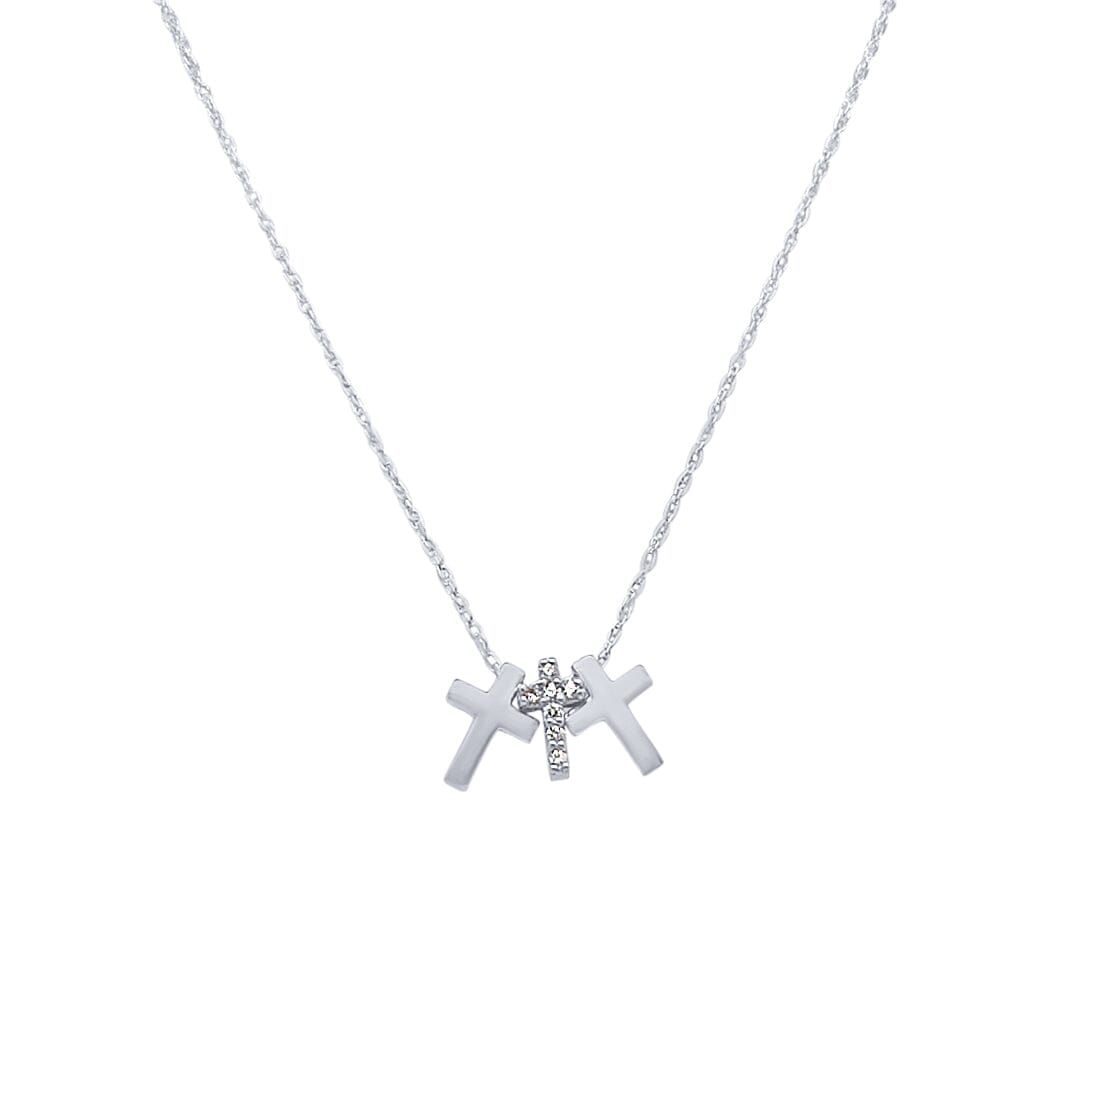 42cm Cross Necklace with Cubic Zirconia in Sterling Silver Necklaces Bevilles 